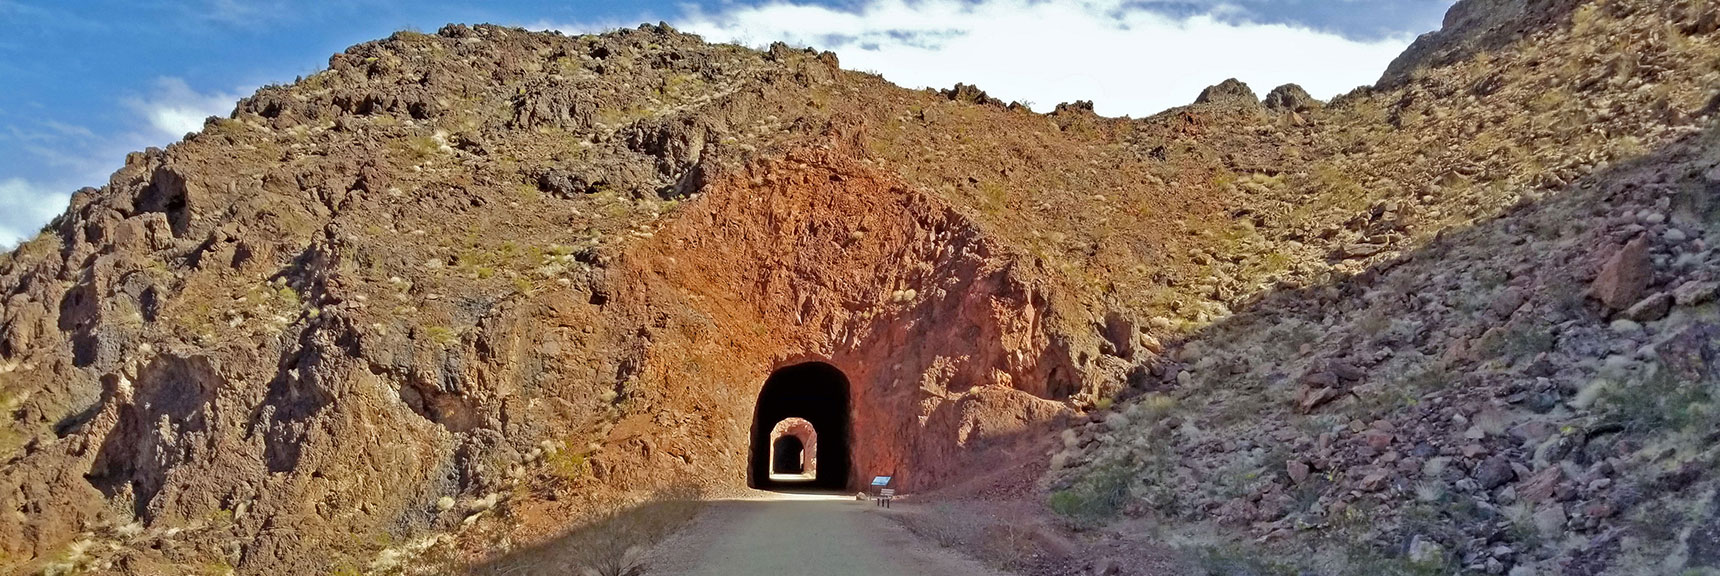 The 5 Railroad Tunnels Were Carved Out of Solid Metamorphic Rock | Historic Railroad Trail | Lake Mead National Recreation Area, Nevada